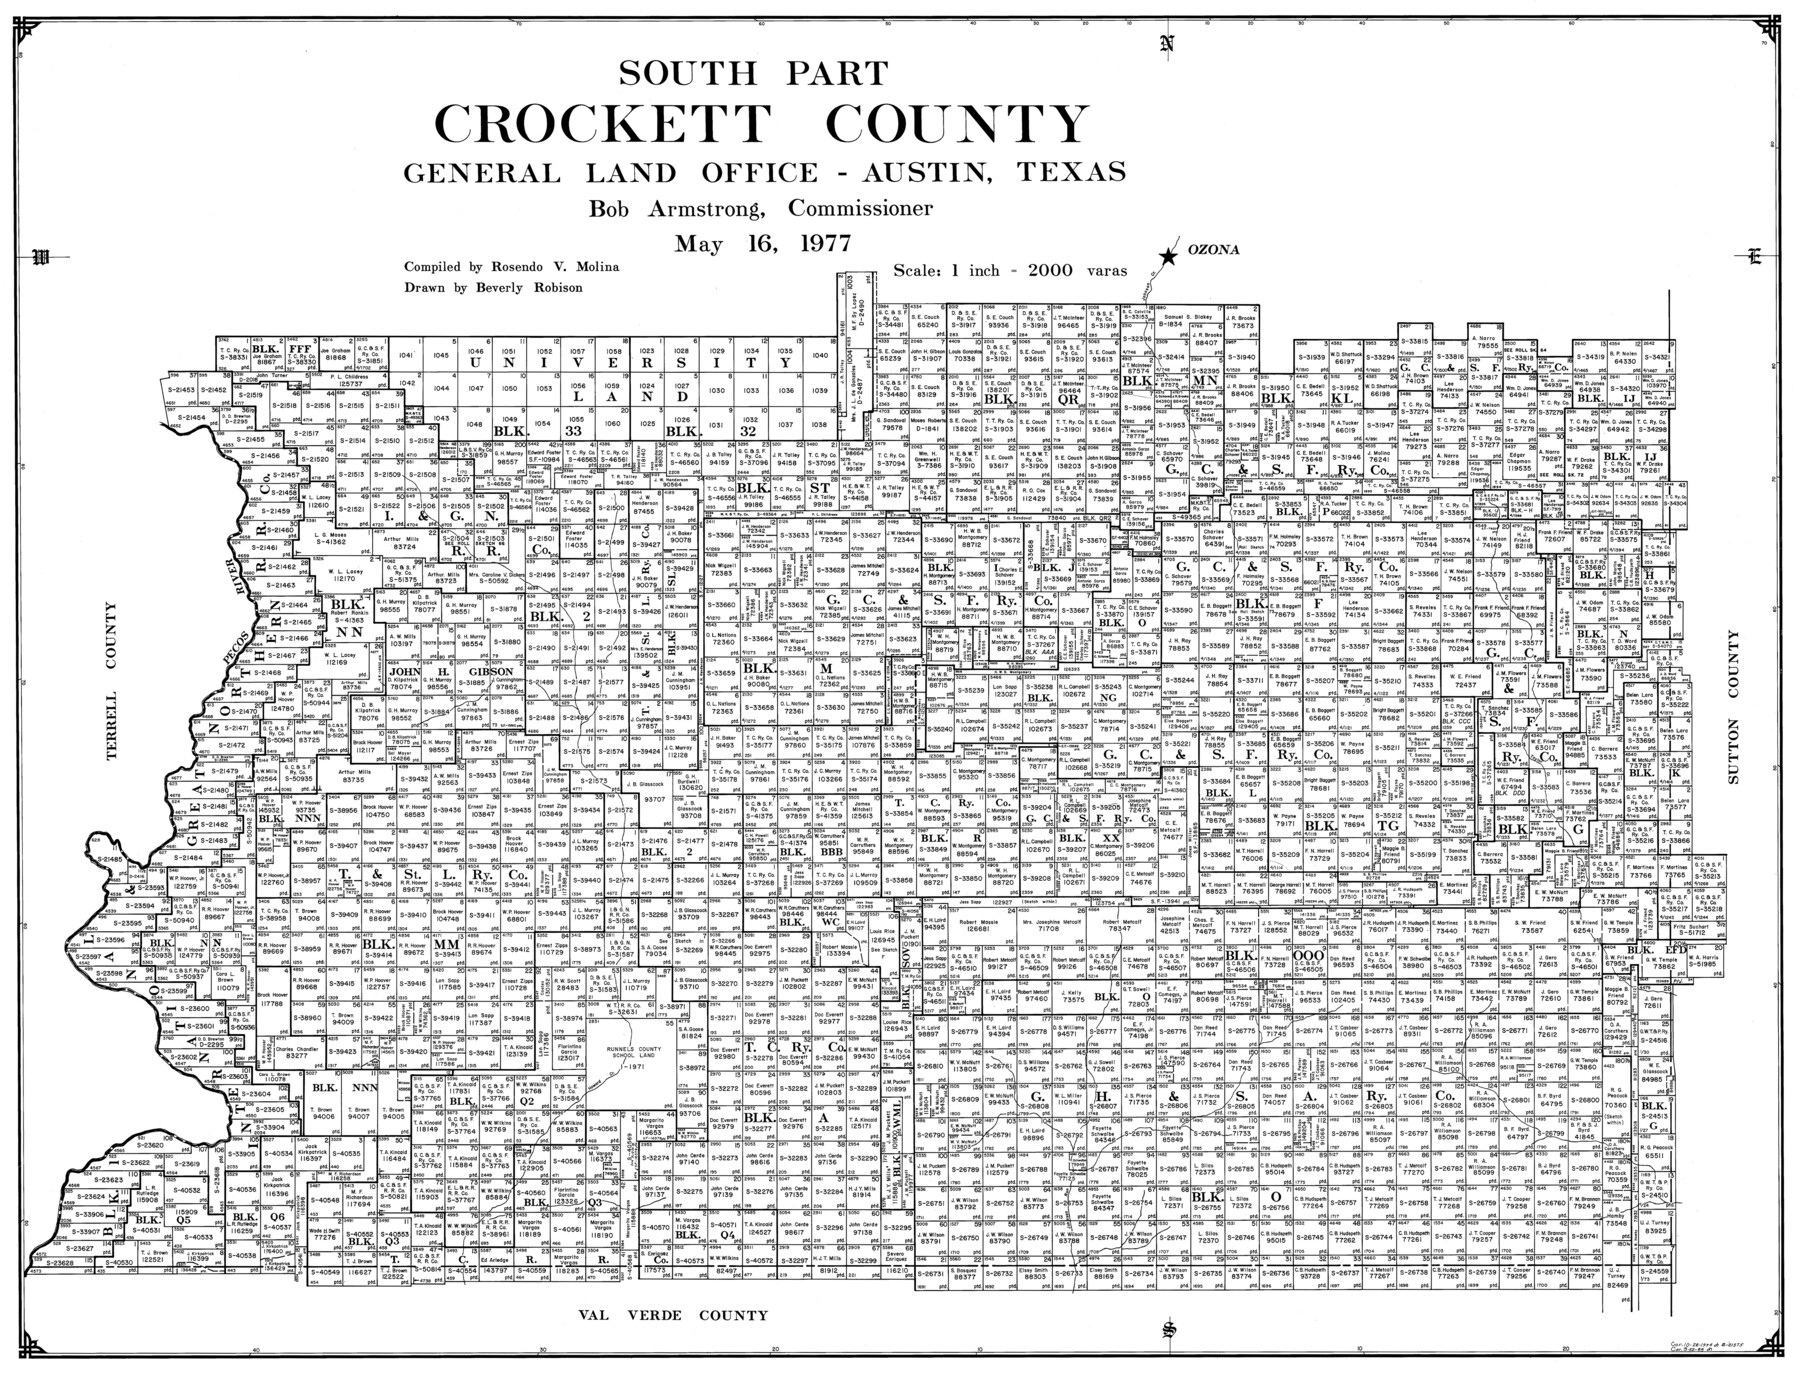 77252, Northwest Part Crockett County, General Map Collection